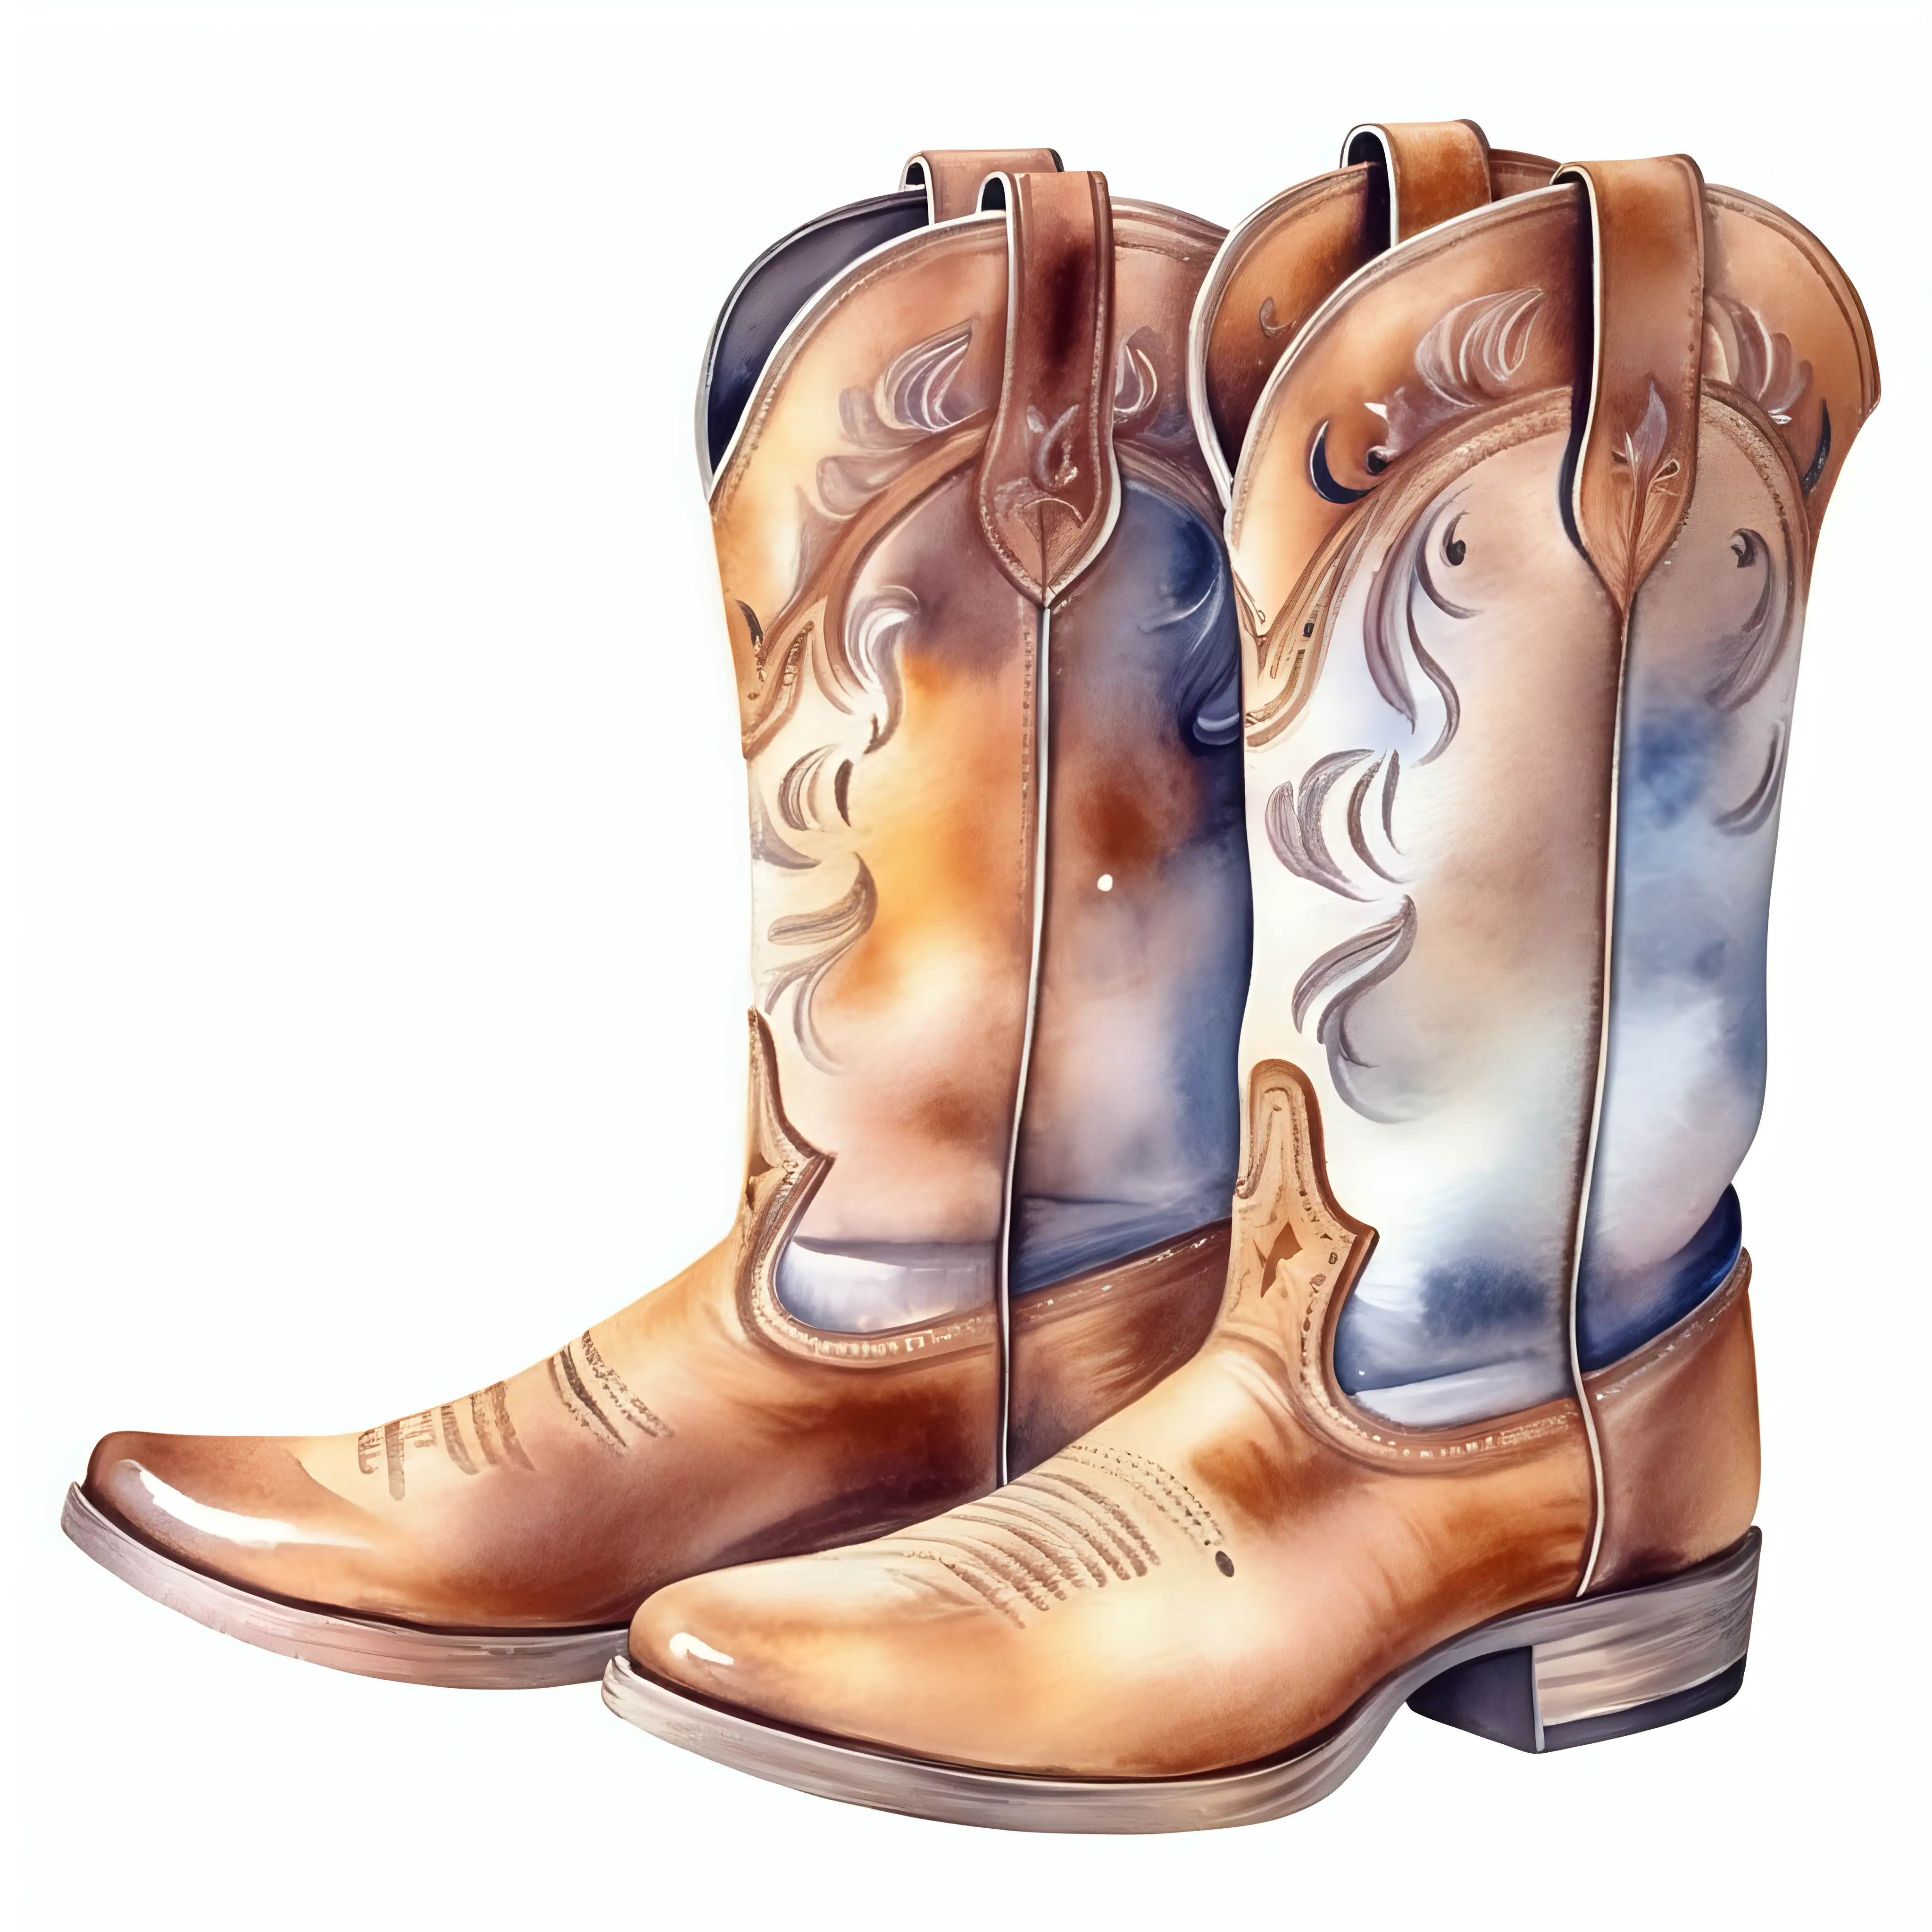 Single Pair of Cowboy Boots Watercolor Painting on White Background